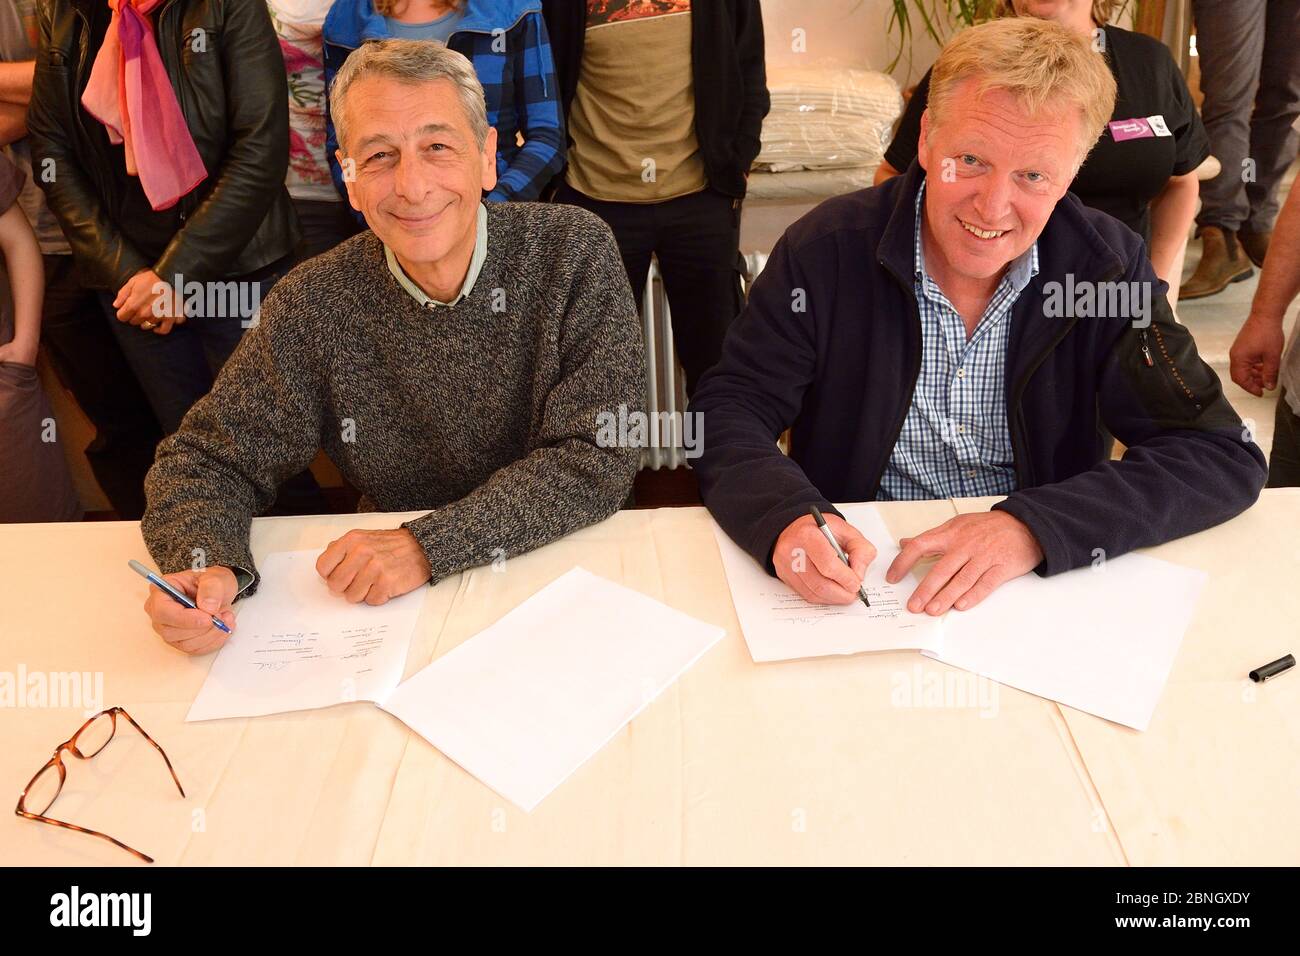 Signing Ceremony of a memorandum of understanding between the Large Carnivore Initiative and Rewilding Europe. Signed by Luigi Boitani and Frans Schep Stock Photo